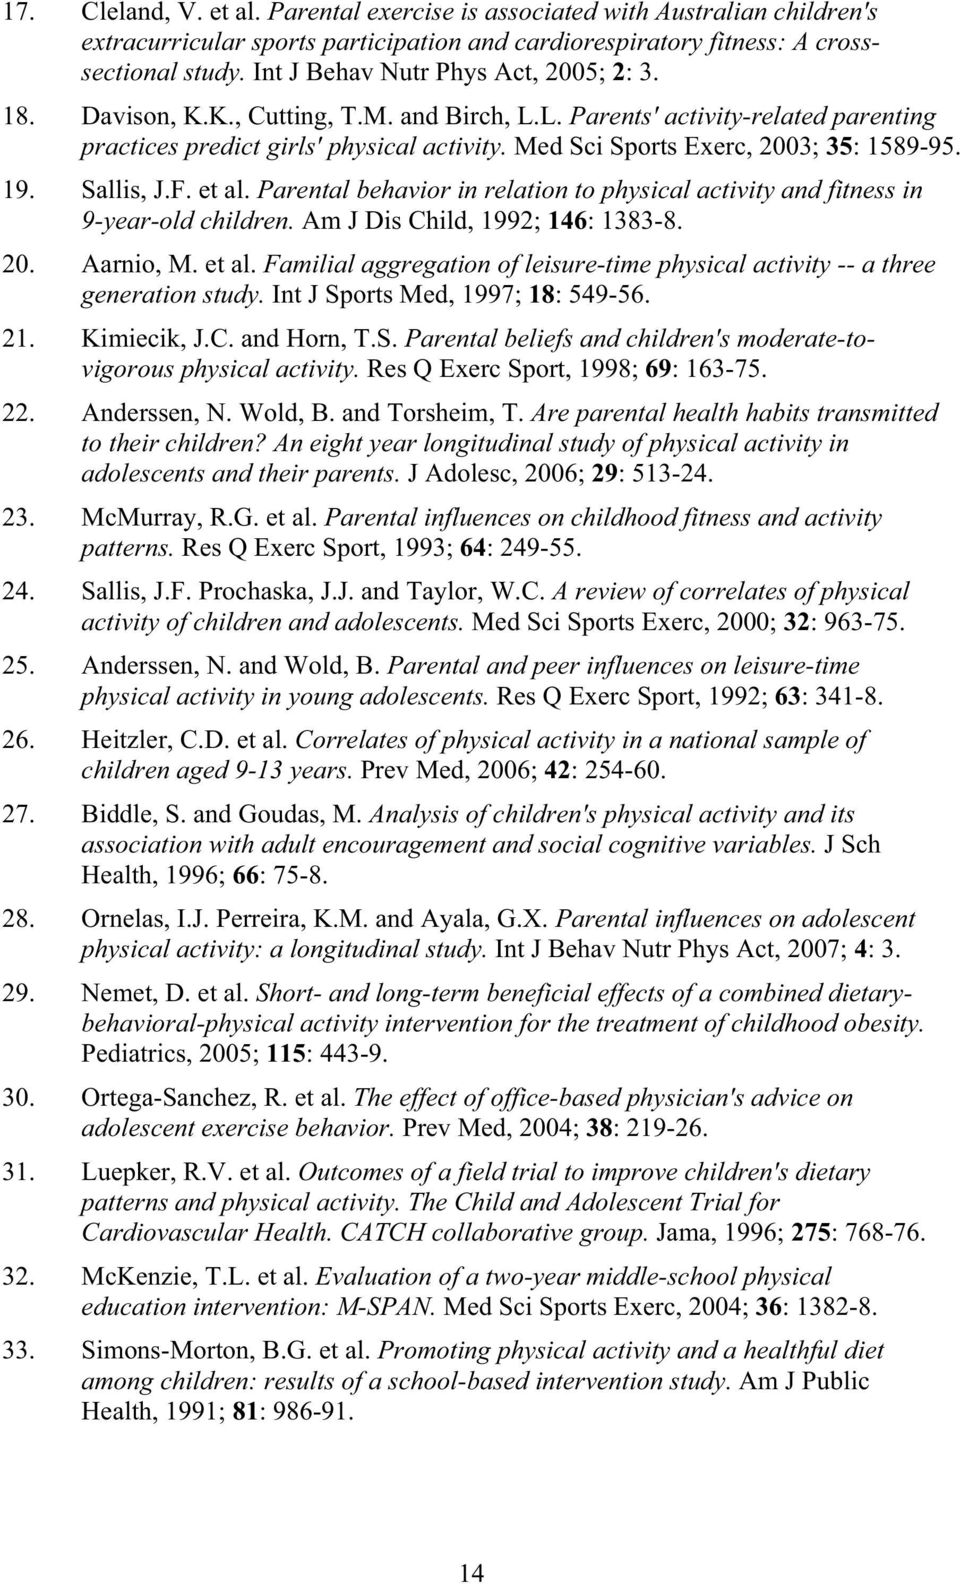 Med Sci Sports Exerc, 2003; 35: 1589-95. 19. Sallis, J.F. et al. Parental behavior in relation to physical activity and fitness in 9-year-old children. Am J Dis Child, 1992; 146: 1383-8. 20. Aarnio, M.